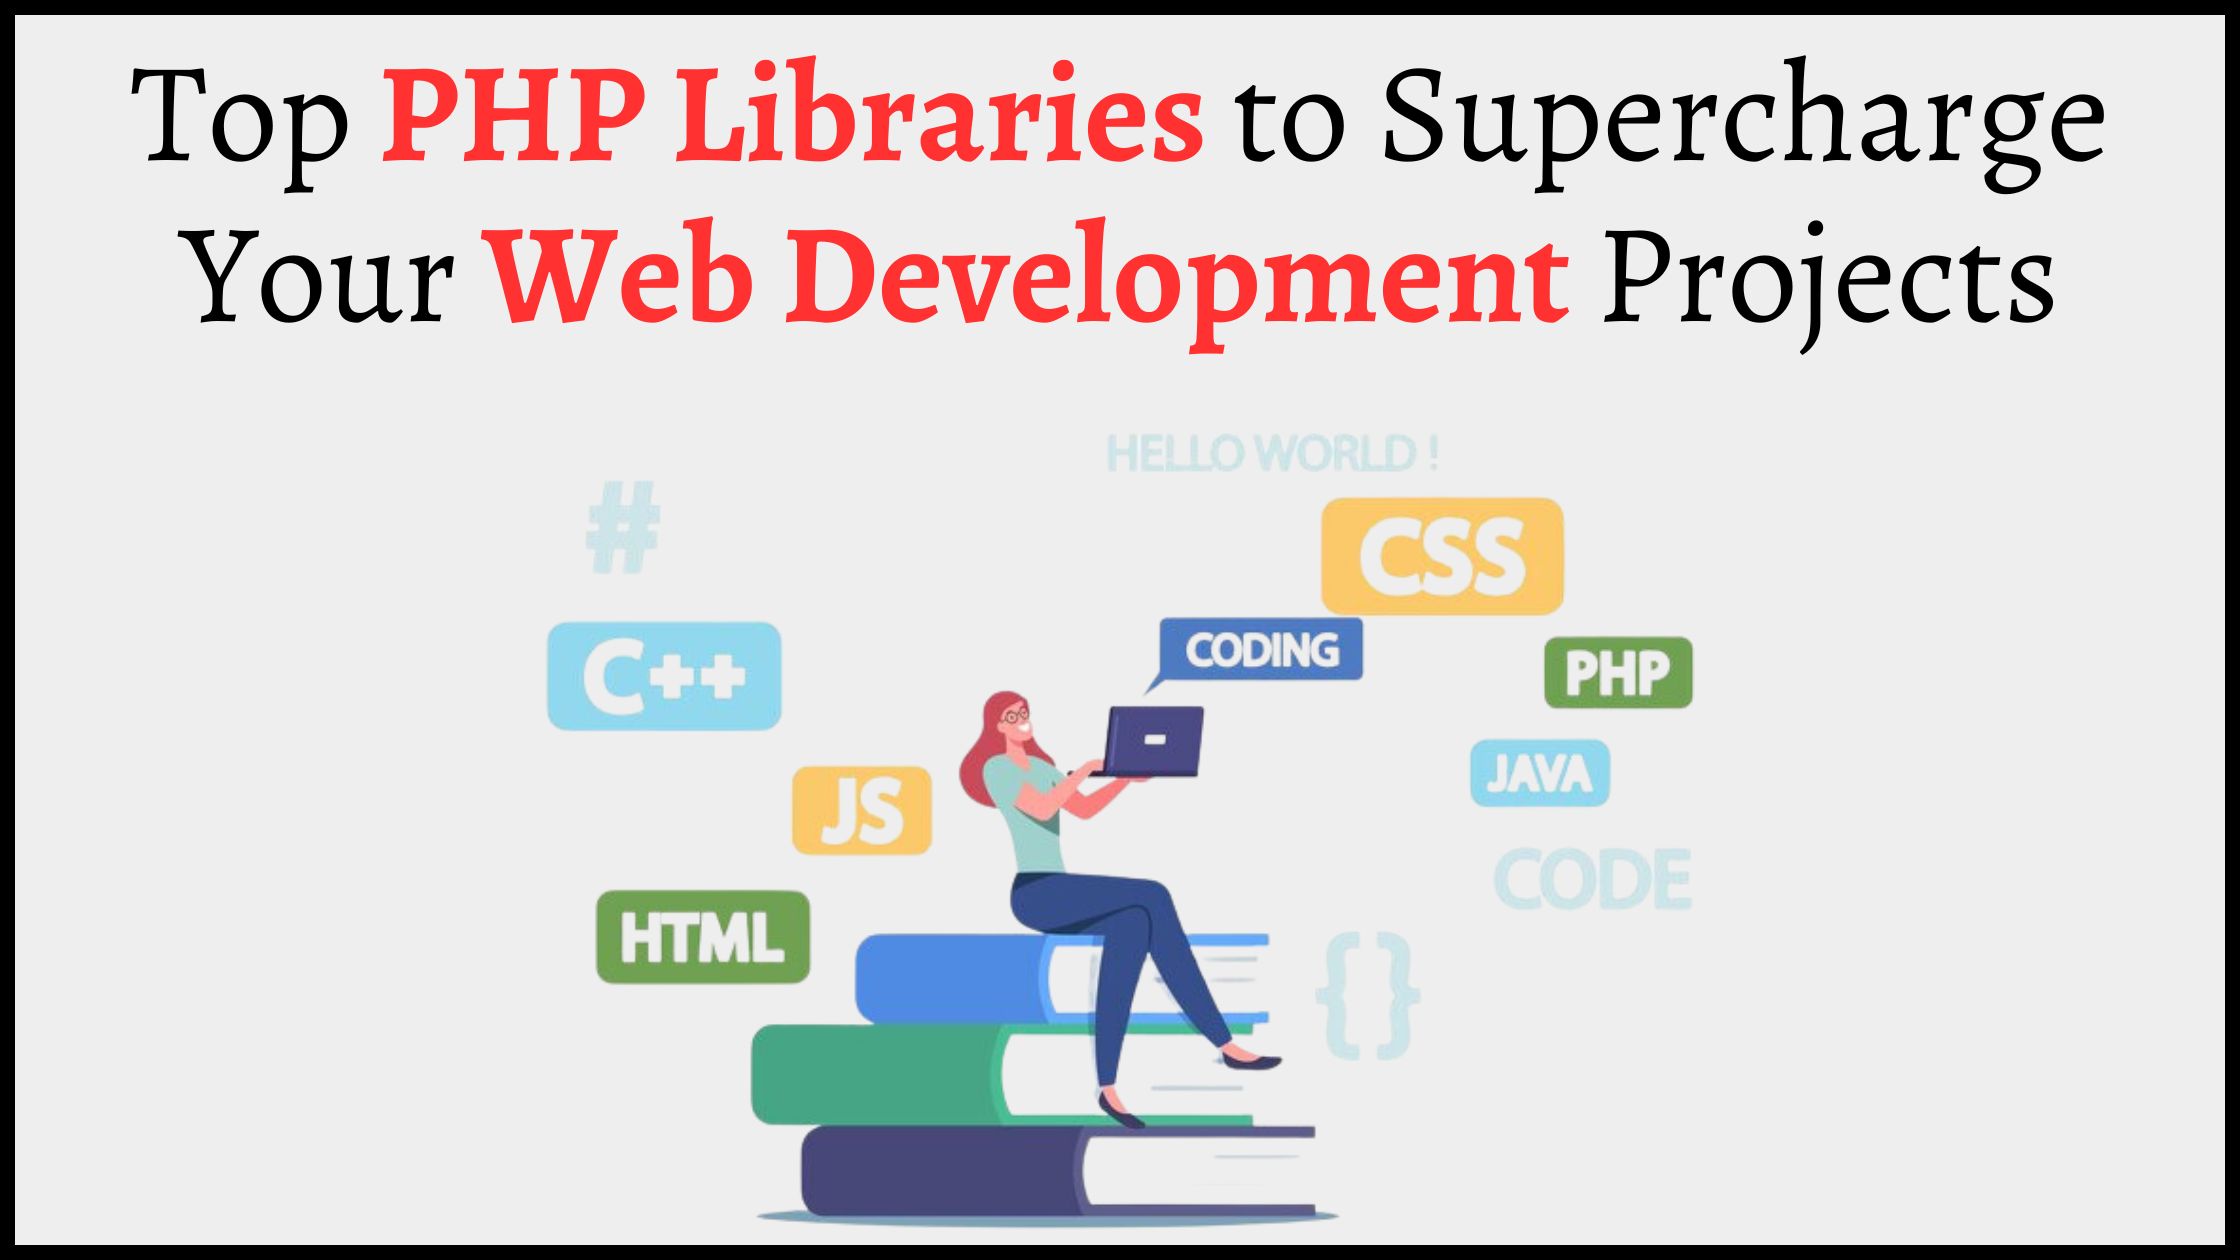 Top PHP Libraries to Supercharge Your Web Development Projects